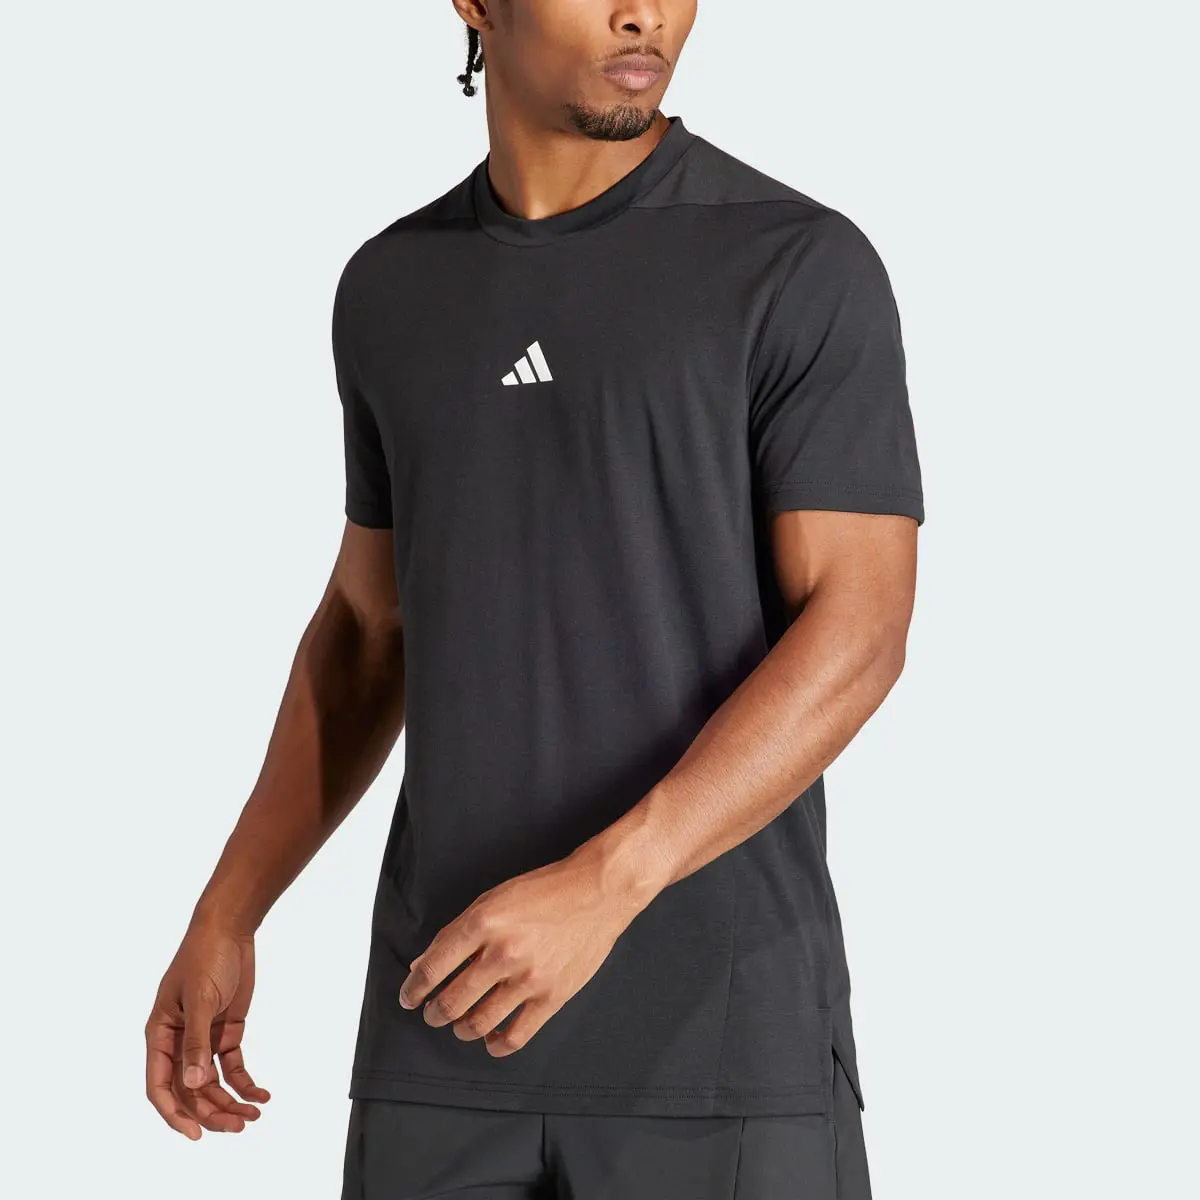 Adidas Designed for Training Workout Tee. 1